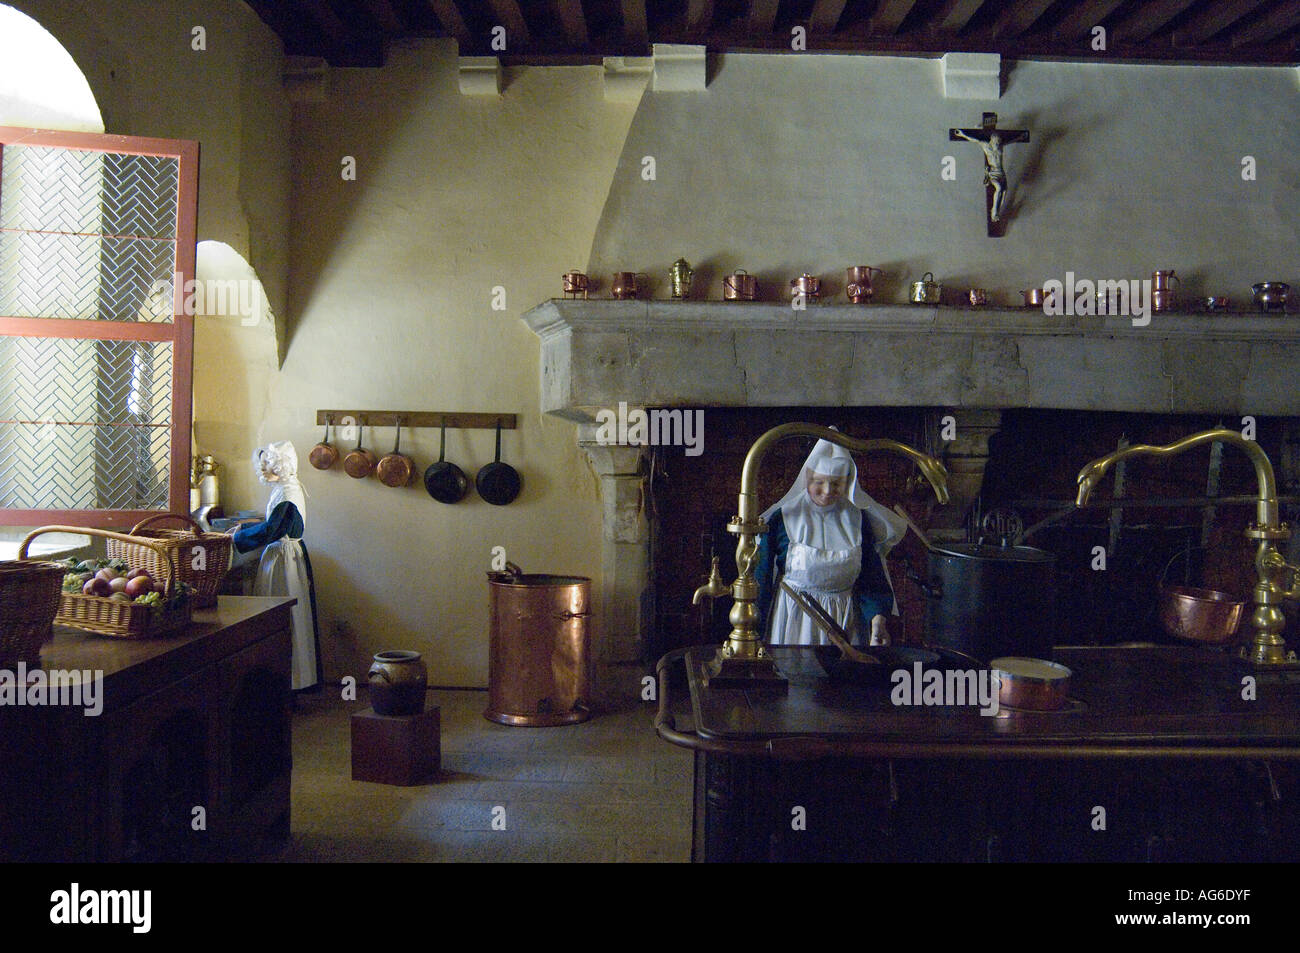 Kitchen interior tableau with nuns dressed in habits, Hospices de Beaune, Hotel Dieu, Burgundy, France Stock Photo